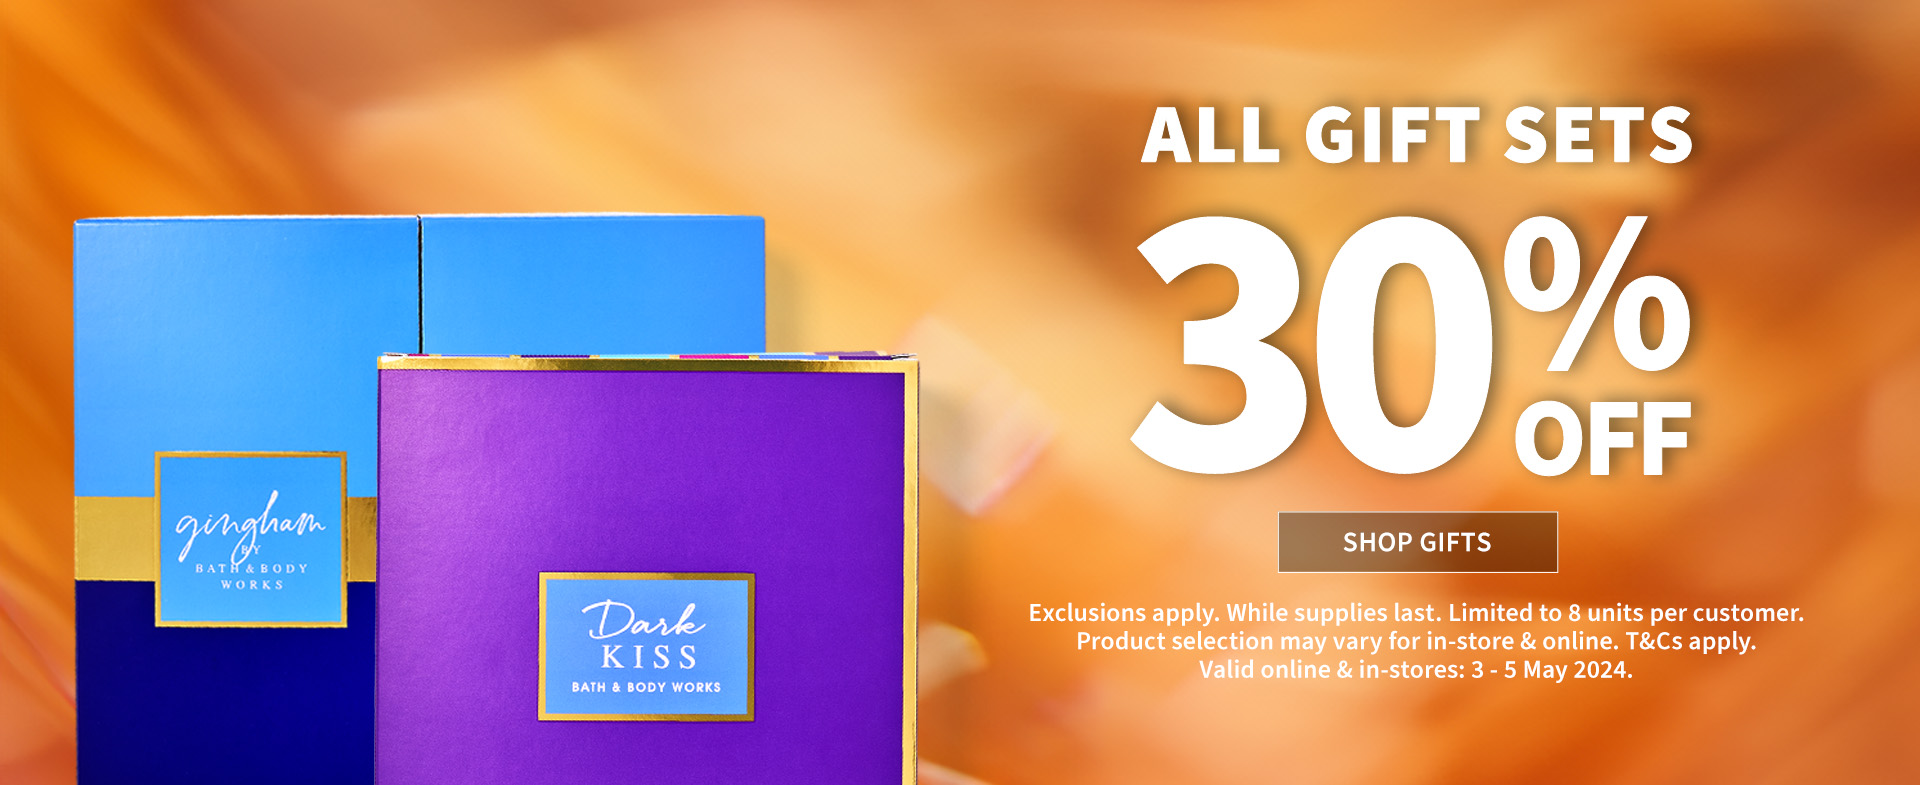 All Gift Sets 30% Off